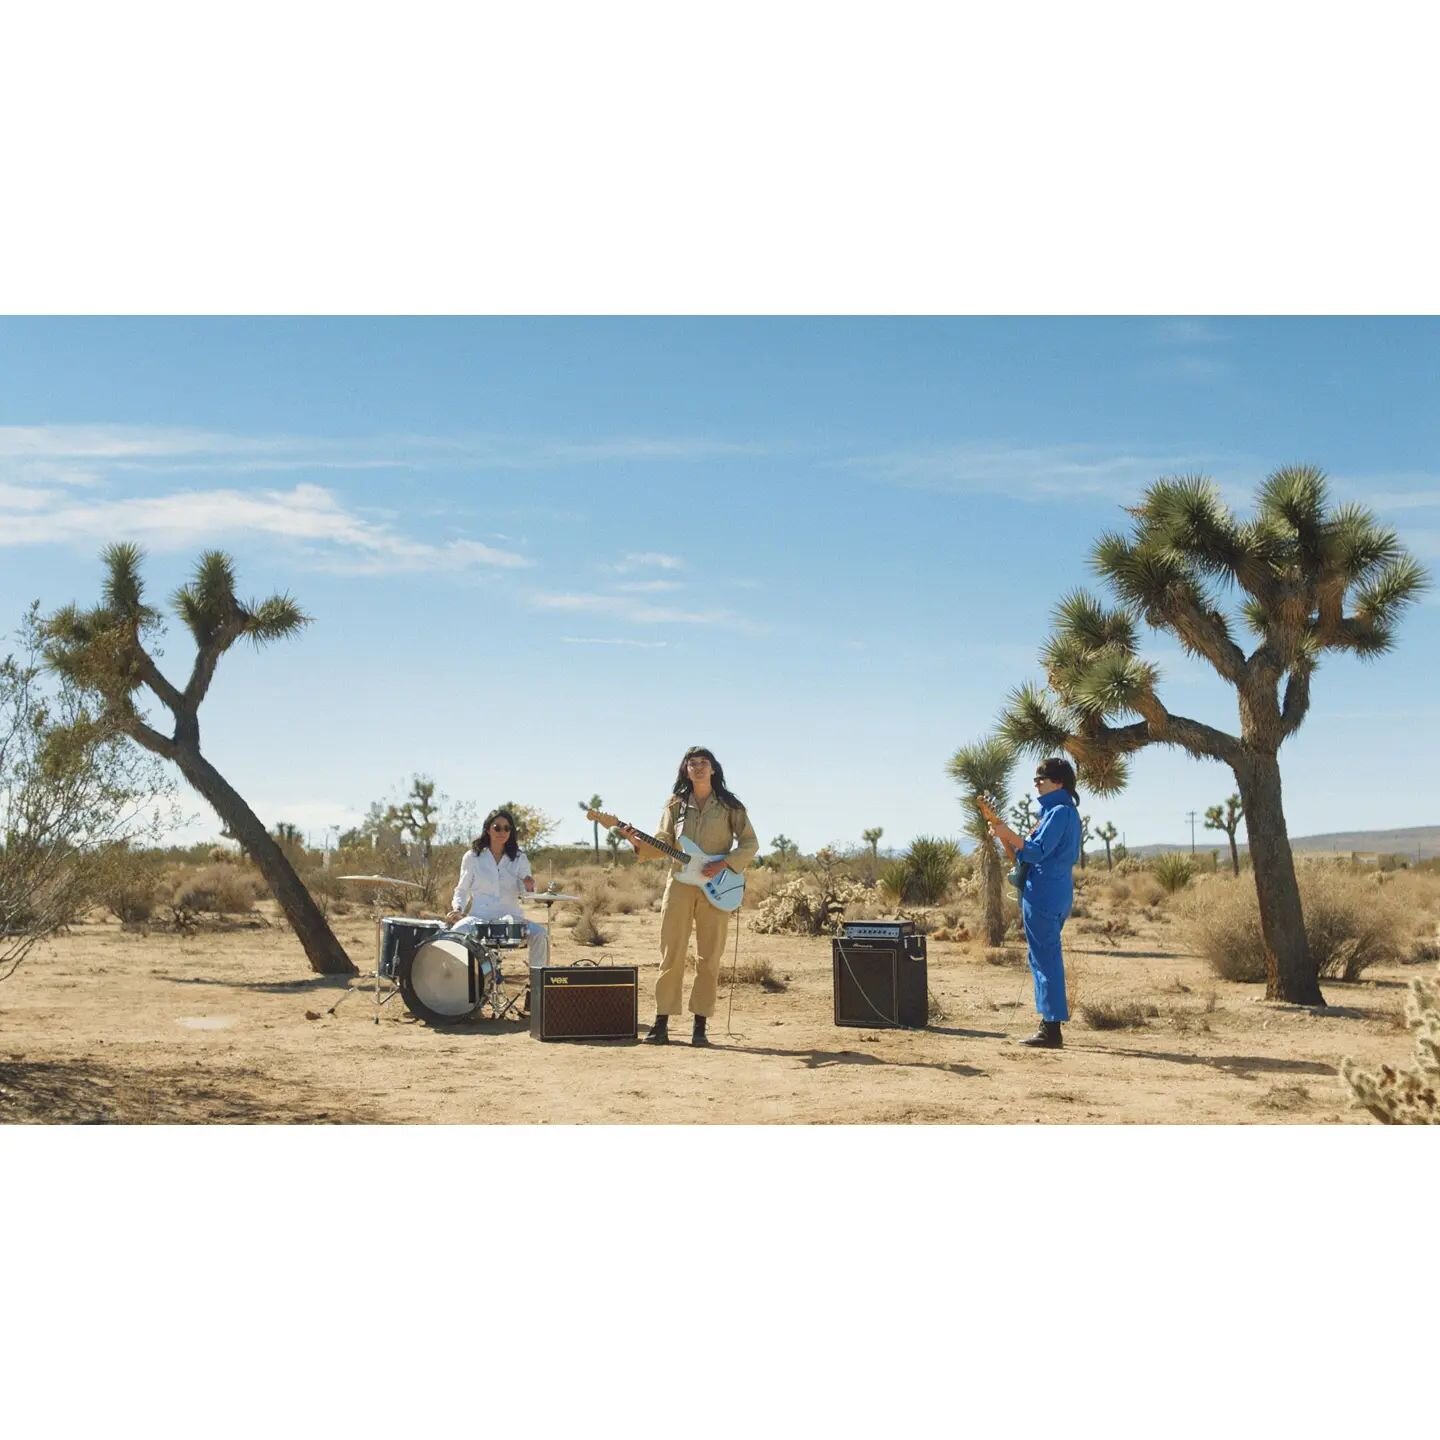 Courtney Barnett 'If I Don't Hear From You Tonight' // 2021

Well holy jumpsuits and combat boots it was so dang cool to be able to work with @oclaire on the new @courtneymelba video!

Dir: @oclaire
DP: @cws_dp
Edit: @gitchmoldberg
Color: Yo
Color Pr